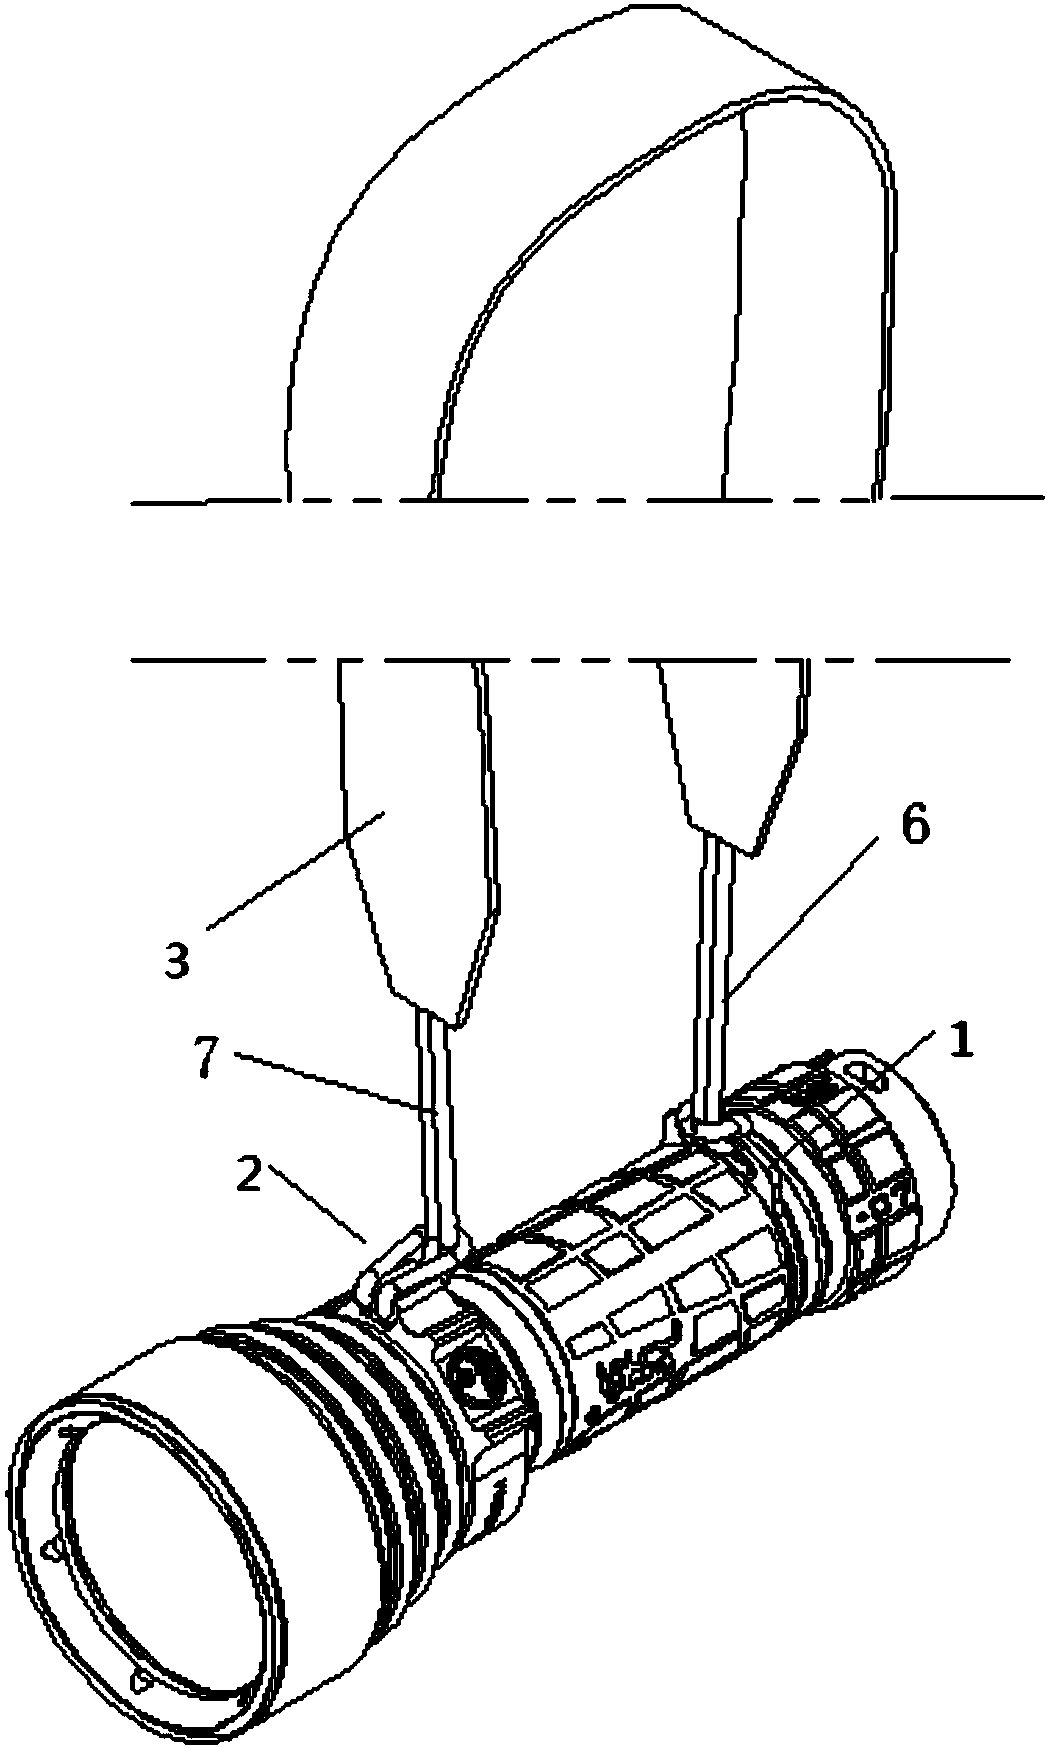 Flexible connecting structure for strap and flashlight using flexible connecting structure